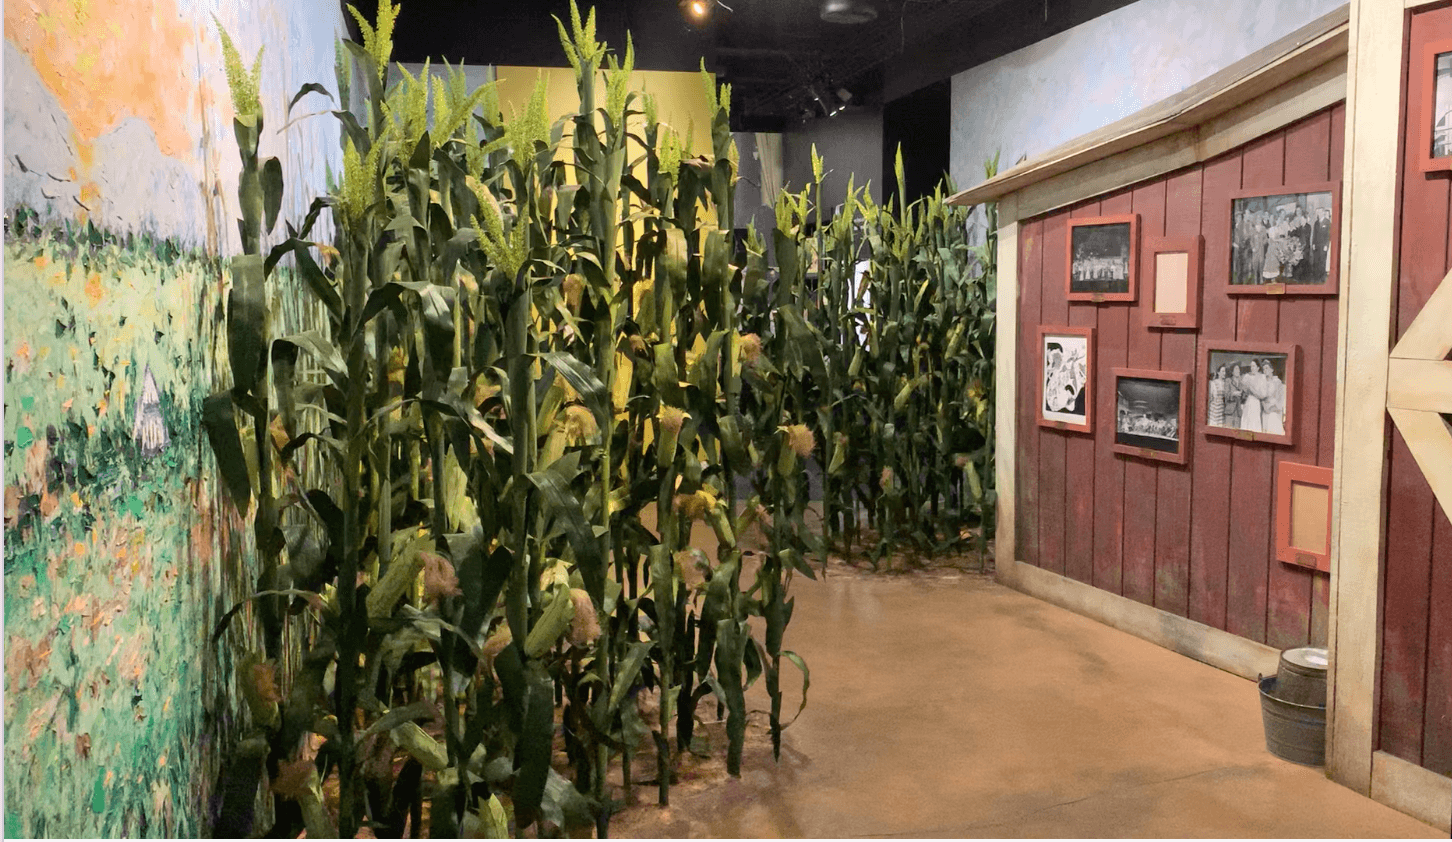  Cornfields line the  Oklahoma!  display as “Oh What a Beautiful Morning” plays overhead, marking the entrance to the Rodgers and Hammerstein display. 